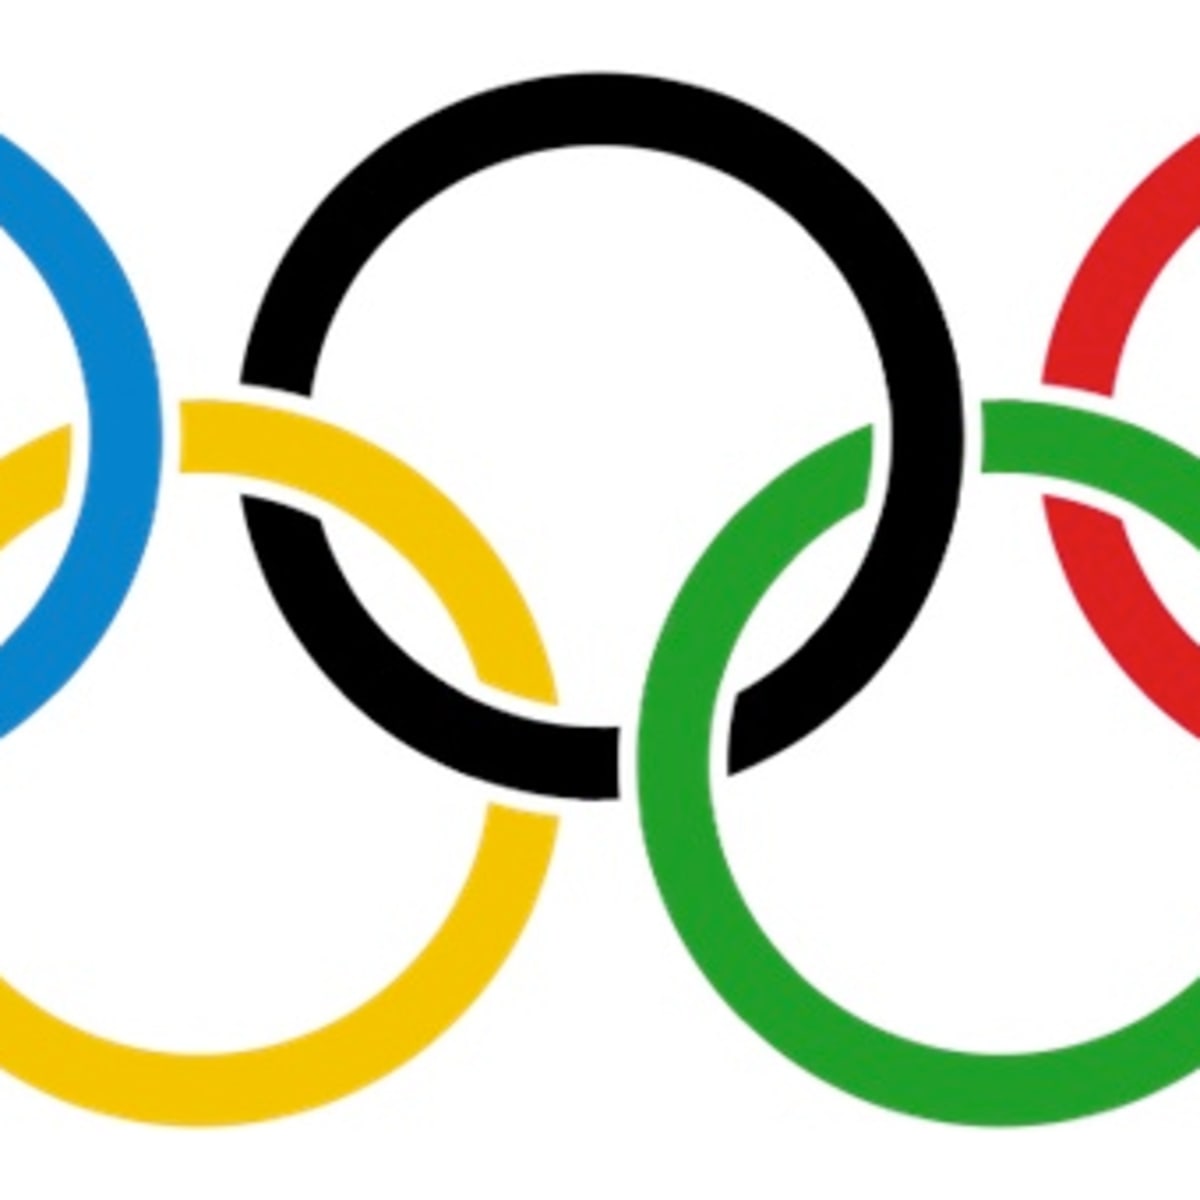 Which are the countries represented by the Olympic rings? - Quora